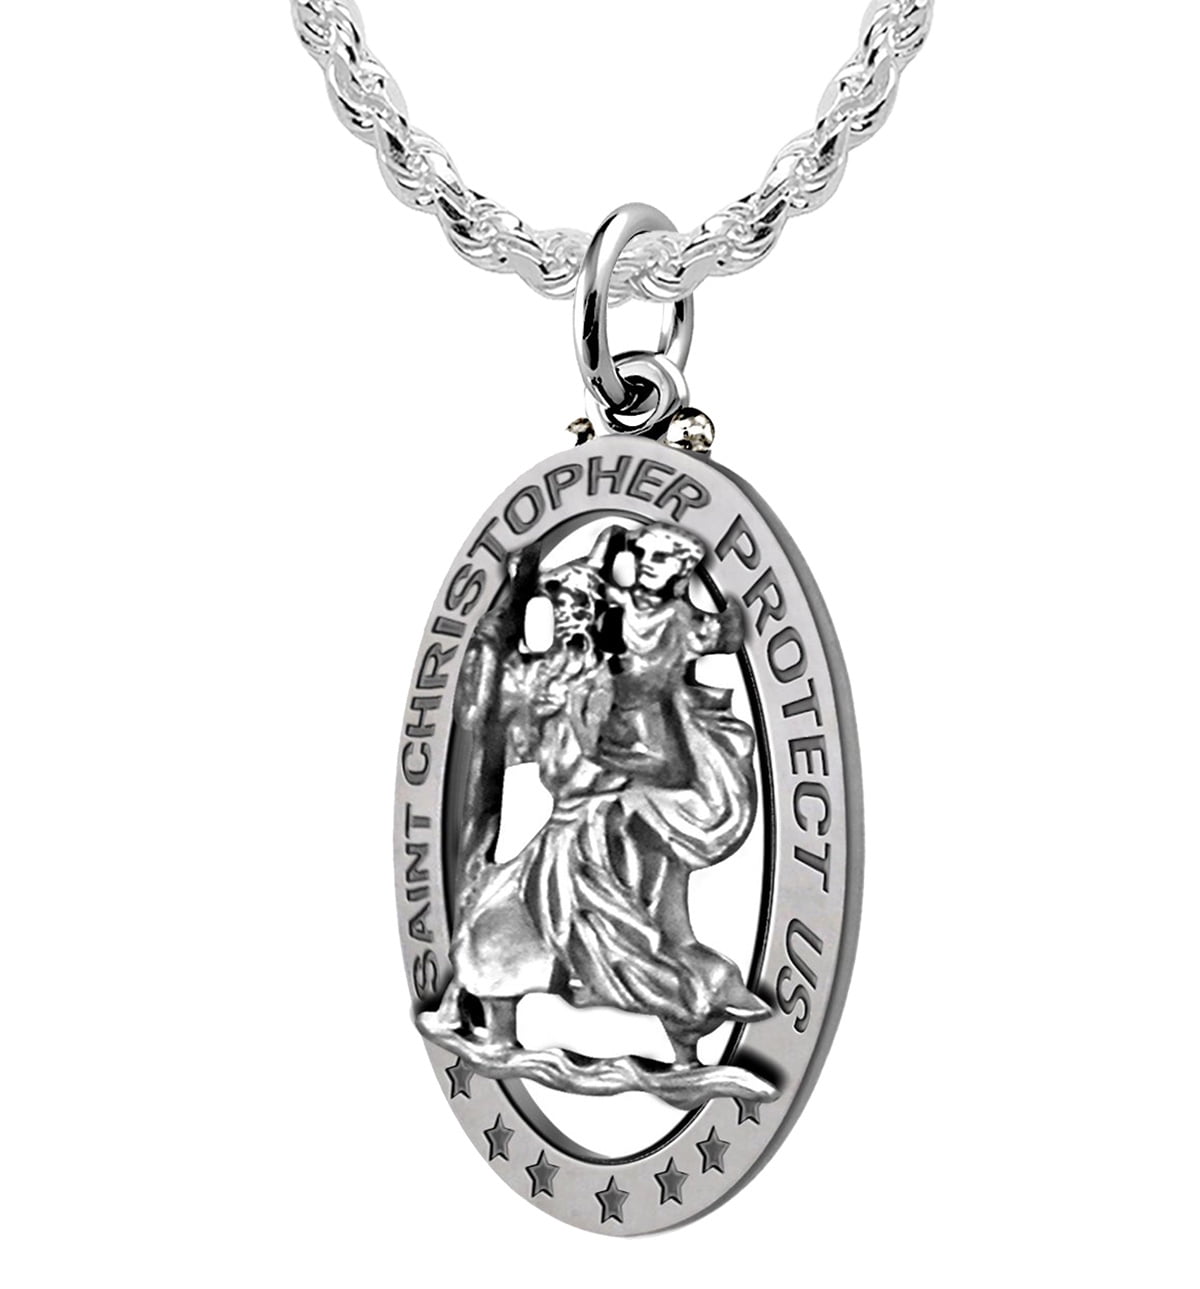 Solid 925 Sterling Silver Mens Gents 22mm Round St Christopher Medal Pendant In Gift Box 